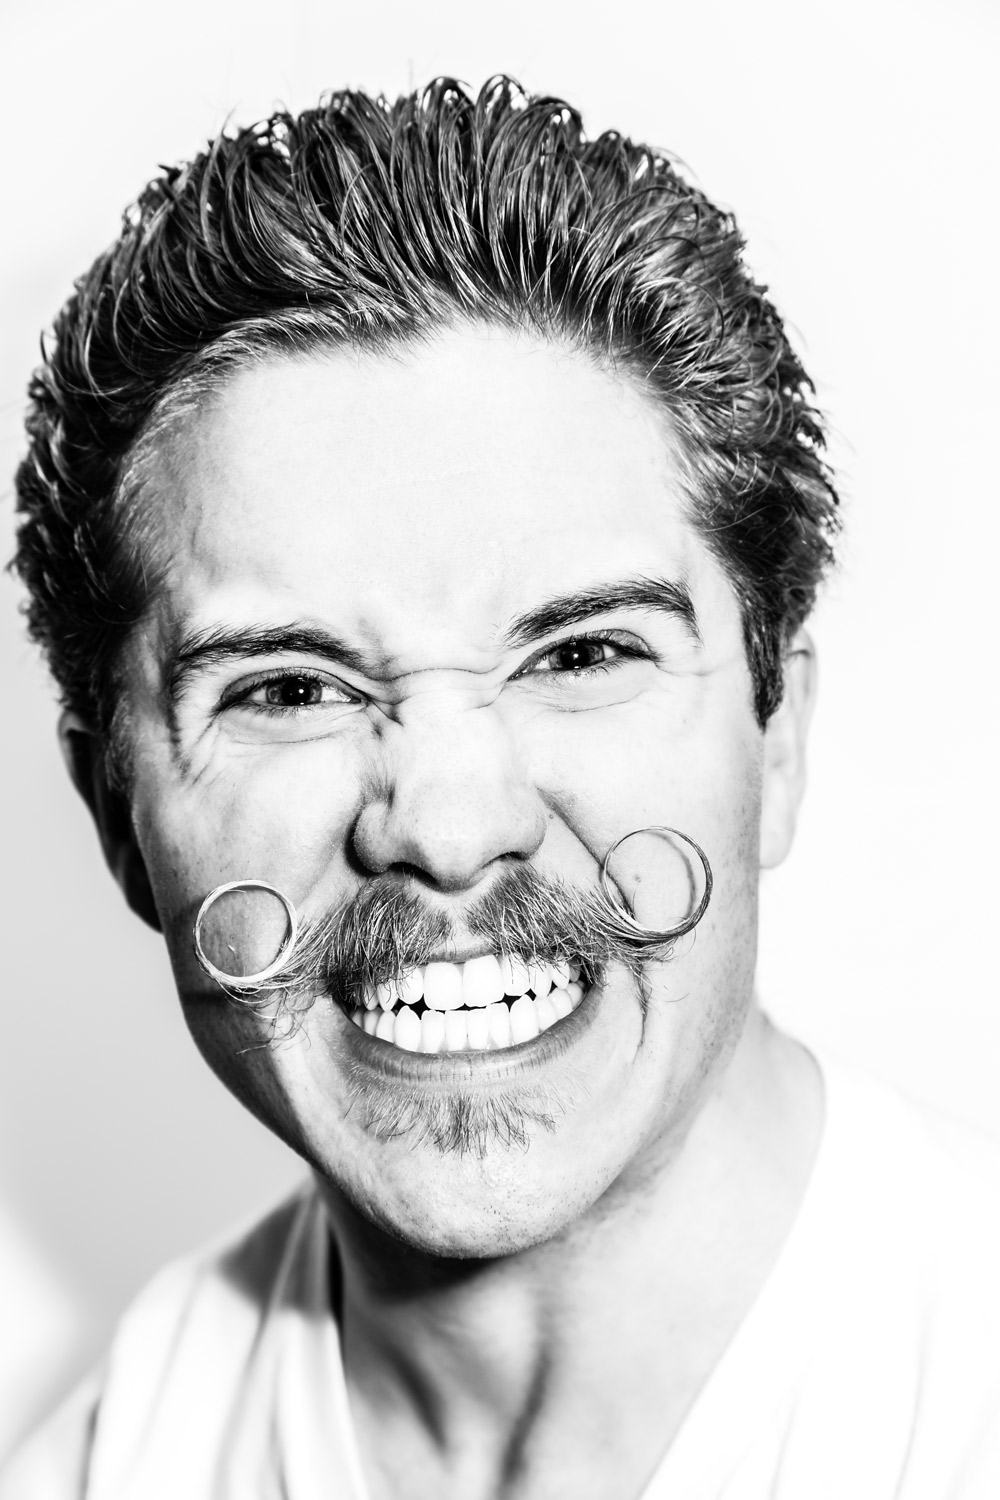 Photographer Dana J. Quigley and his “bicycle mustache.”